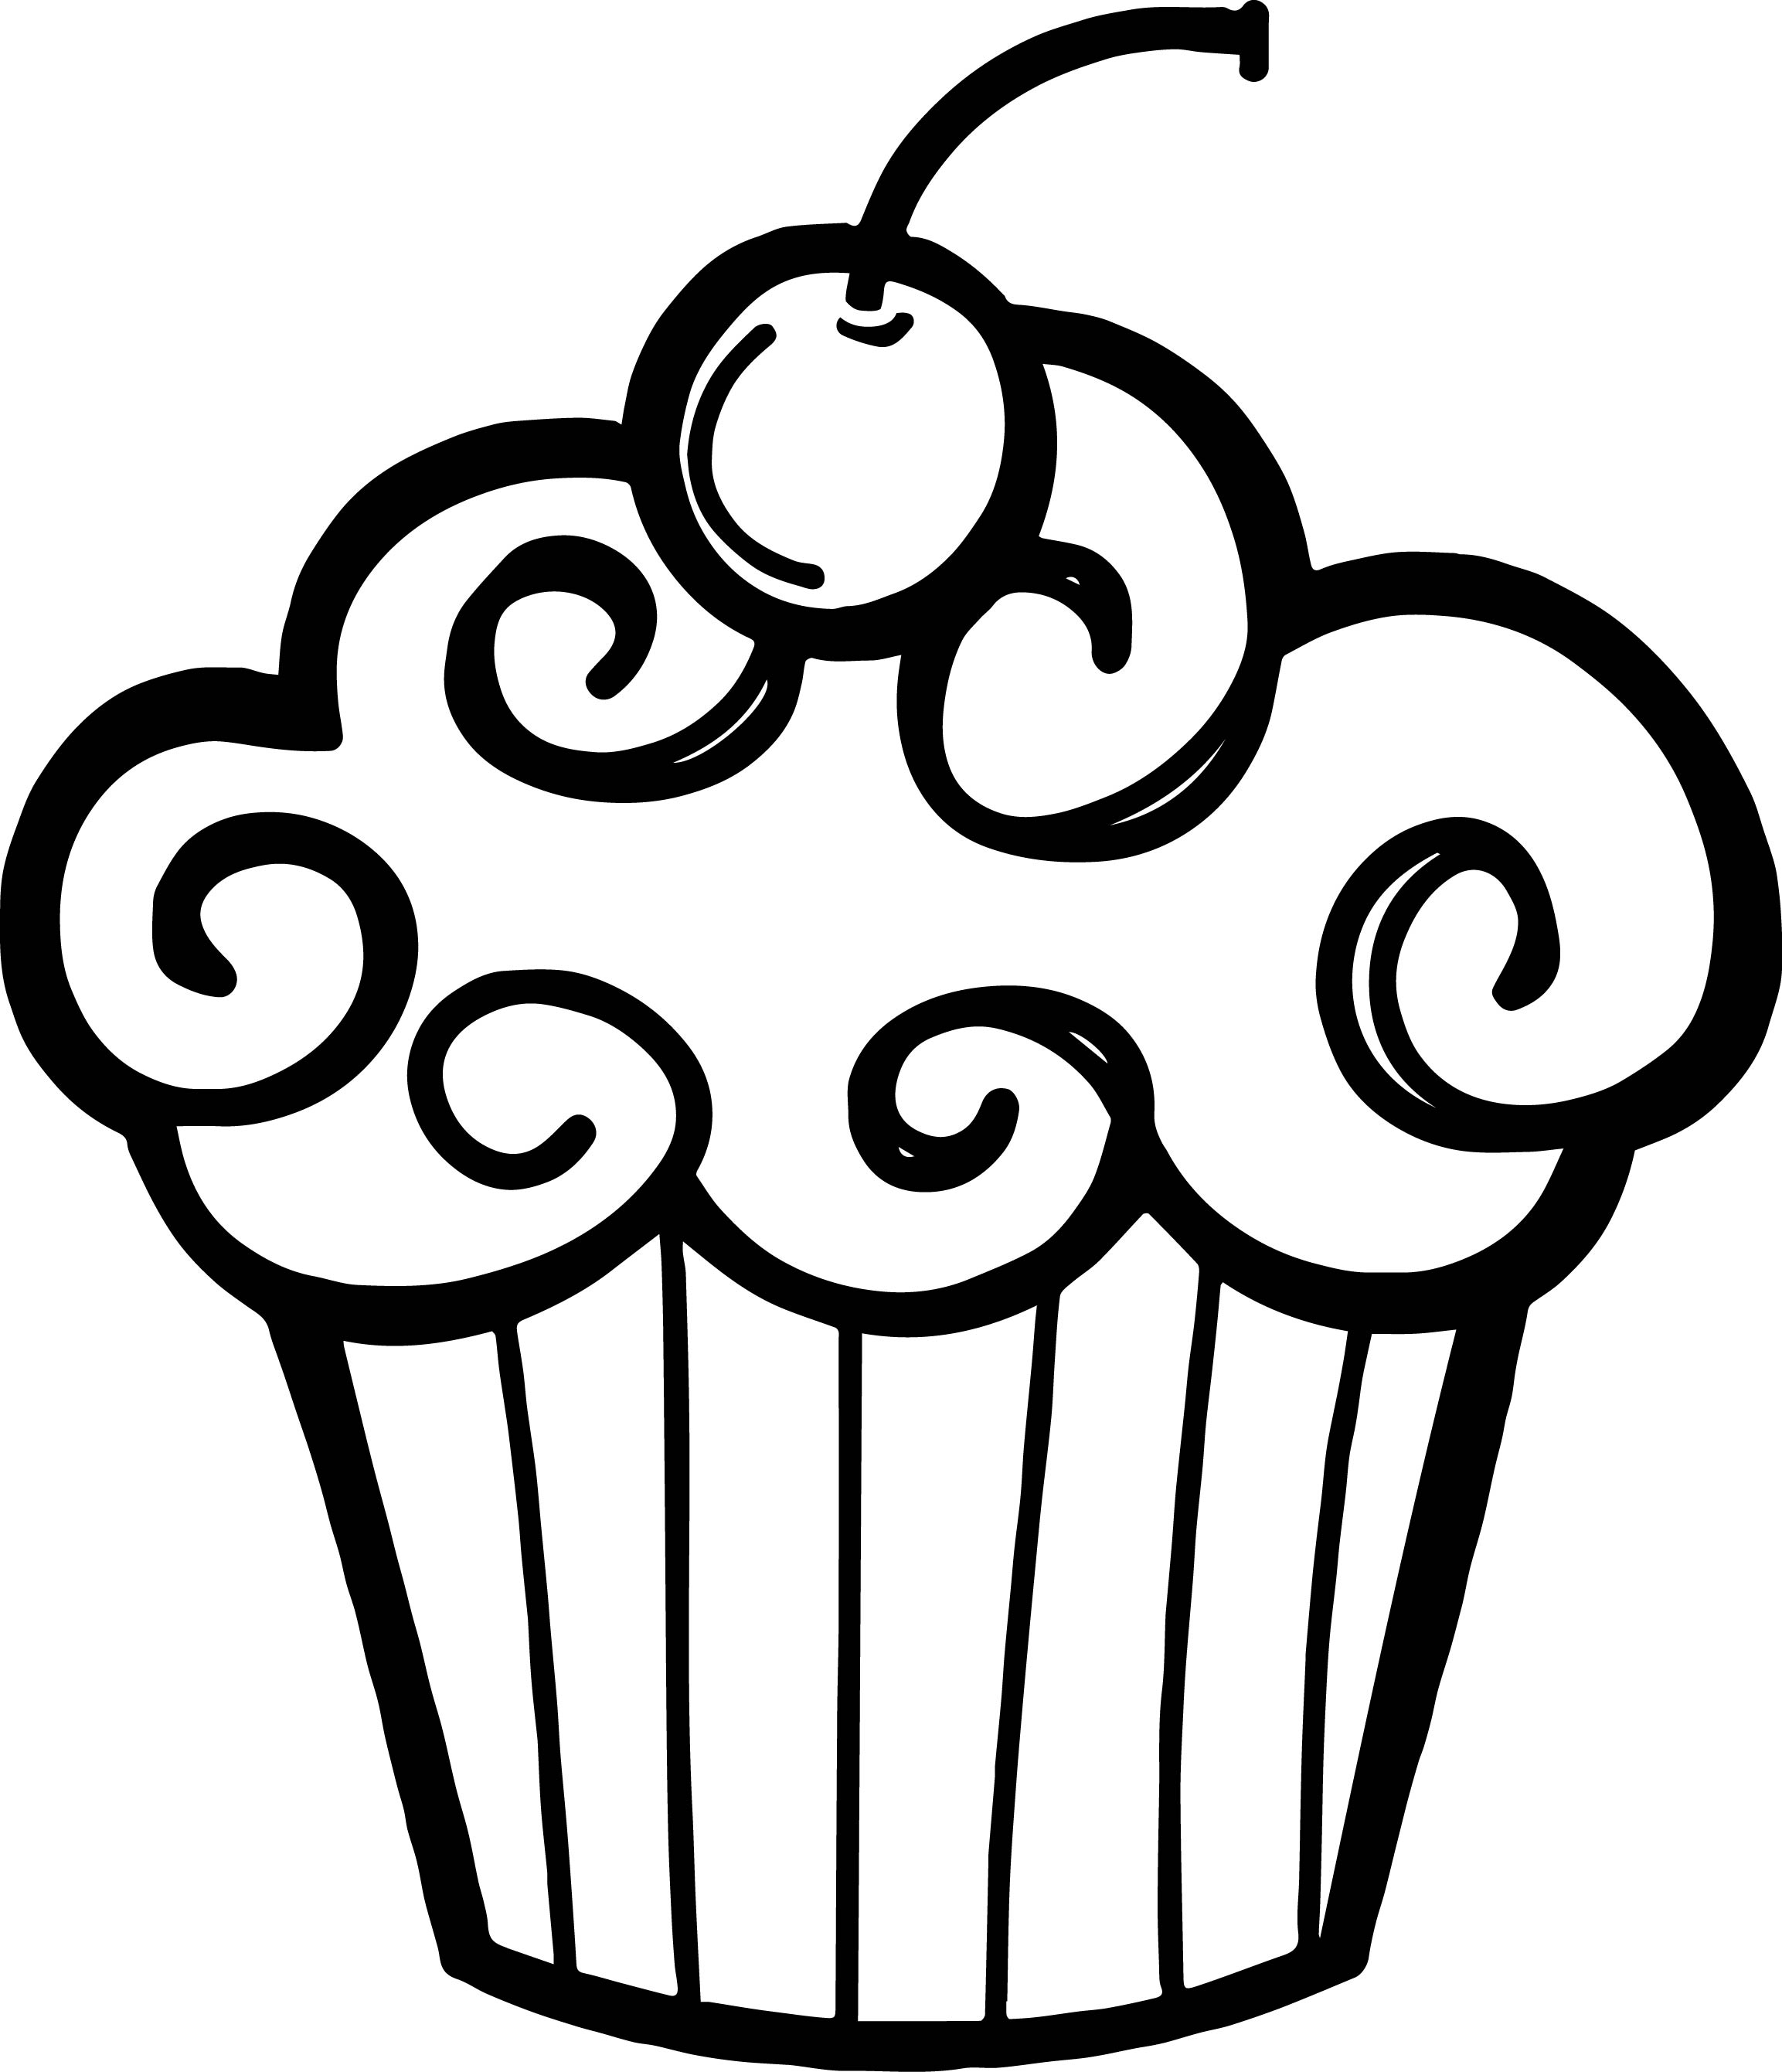 Free Clip art of Birthday Cake Clipart Black and White 3529 Best 